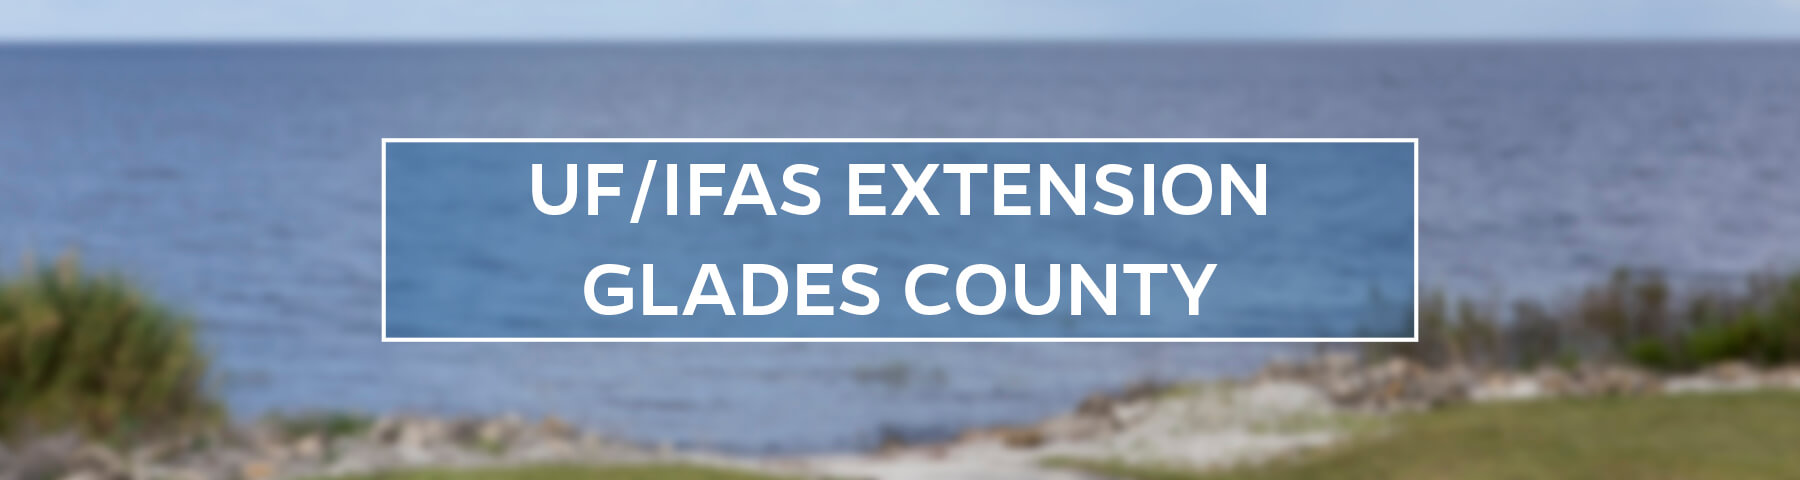 UF/IFAS Extension Glades County